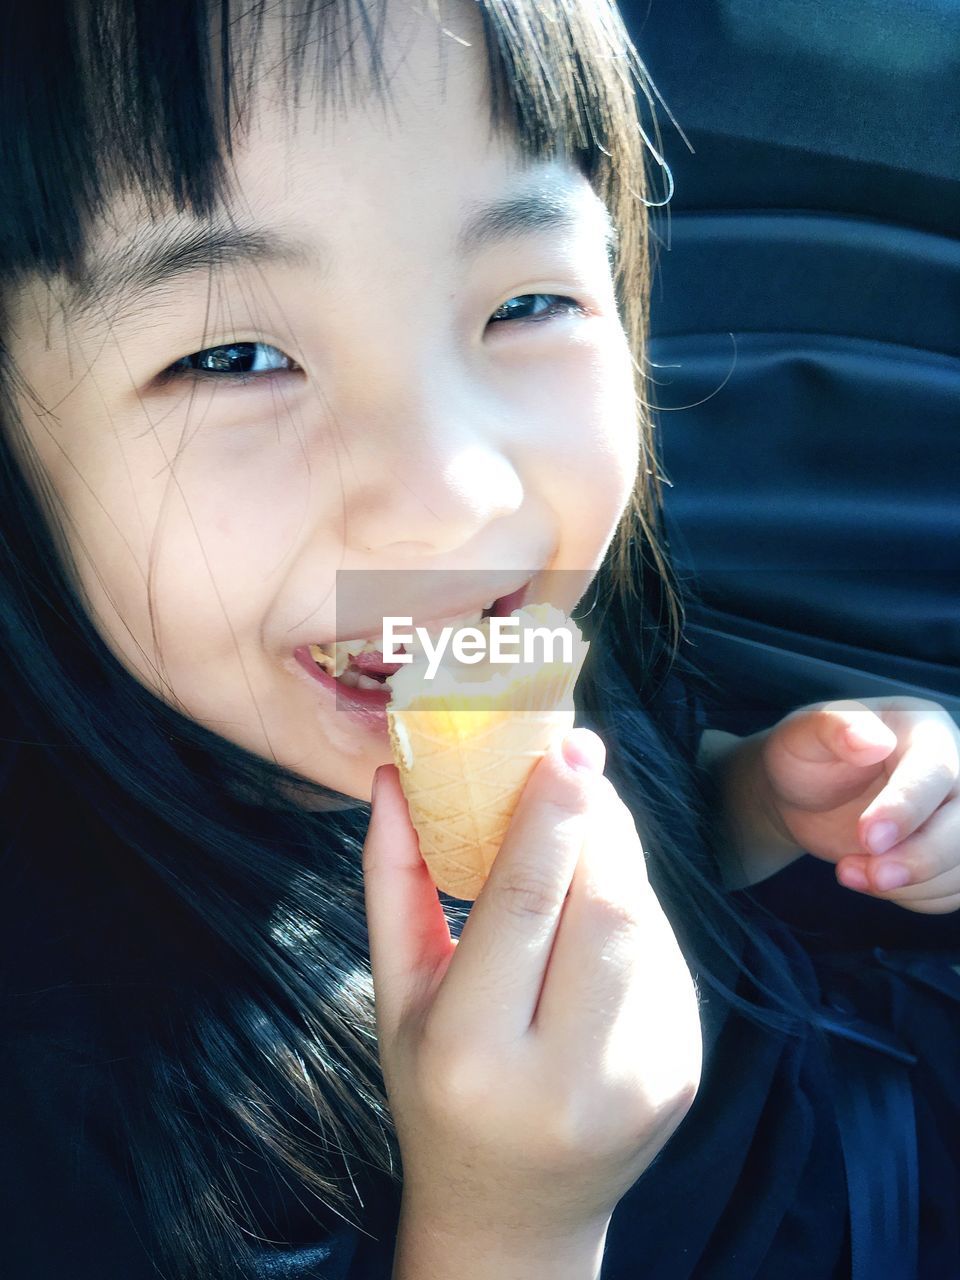 PORTRAIT OF A SMILING GIRL HOLDING ICE CREAM